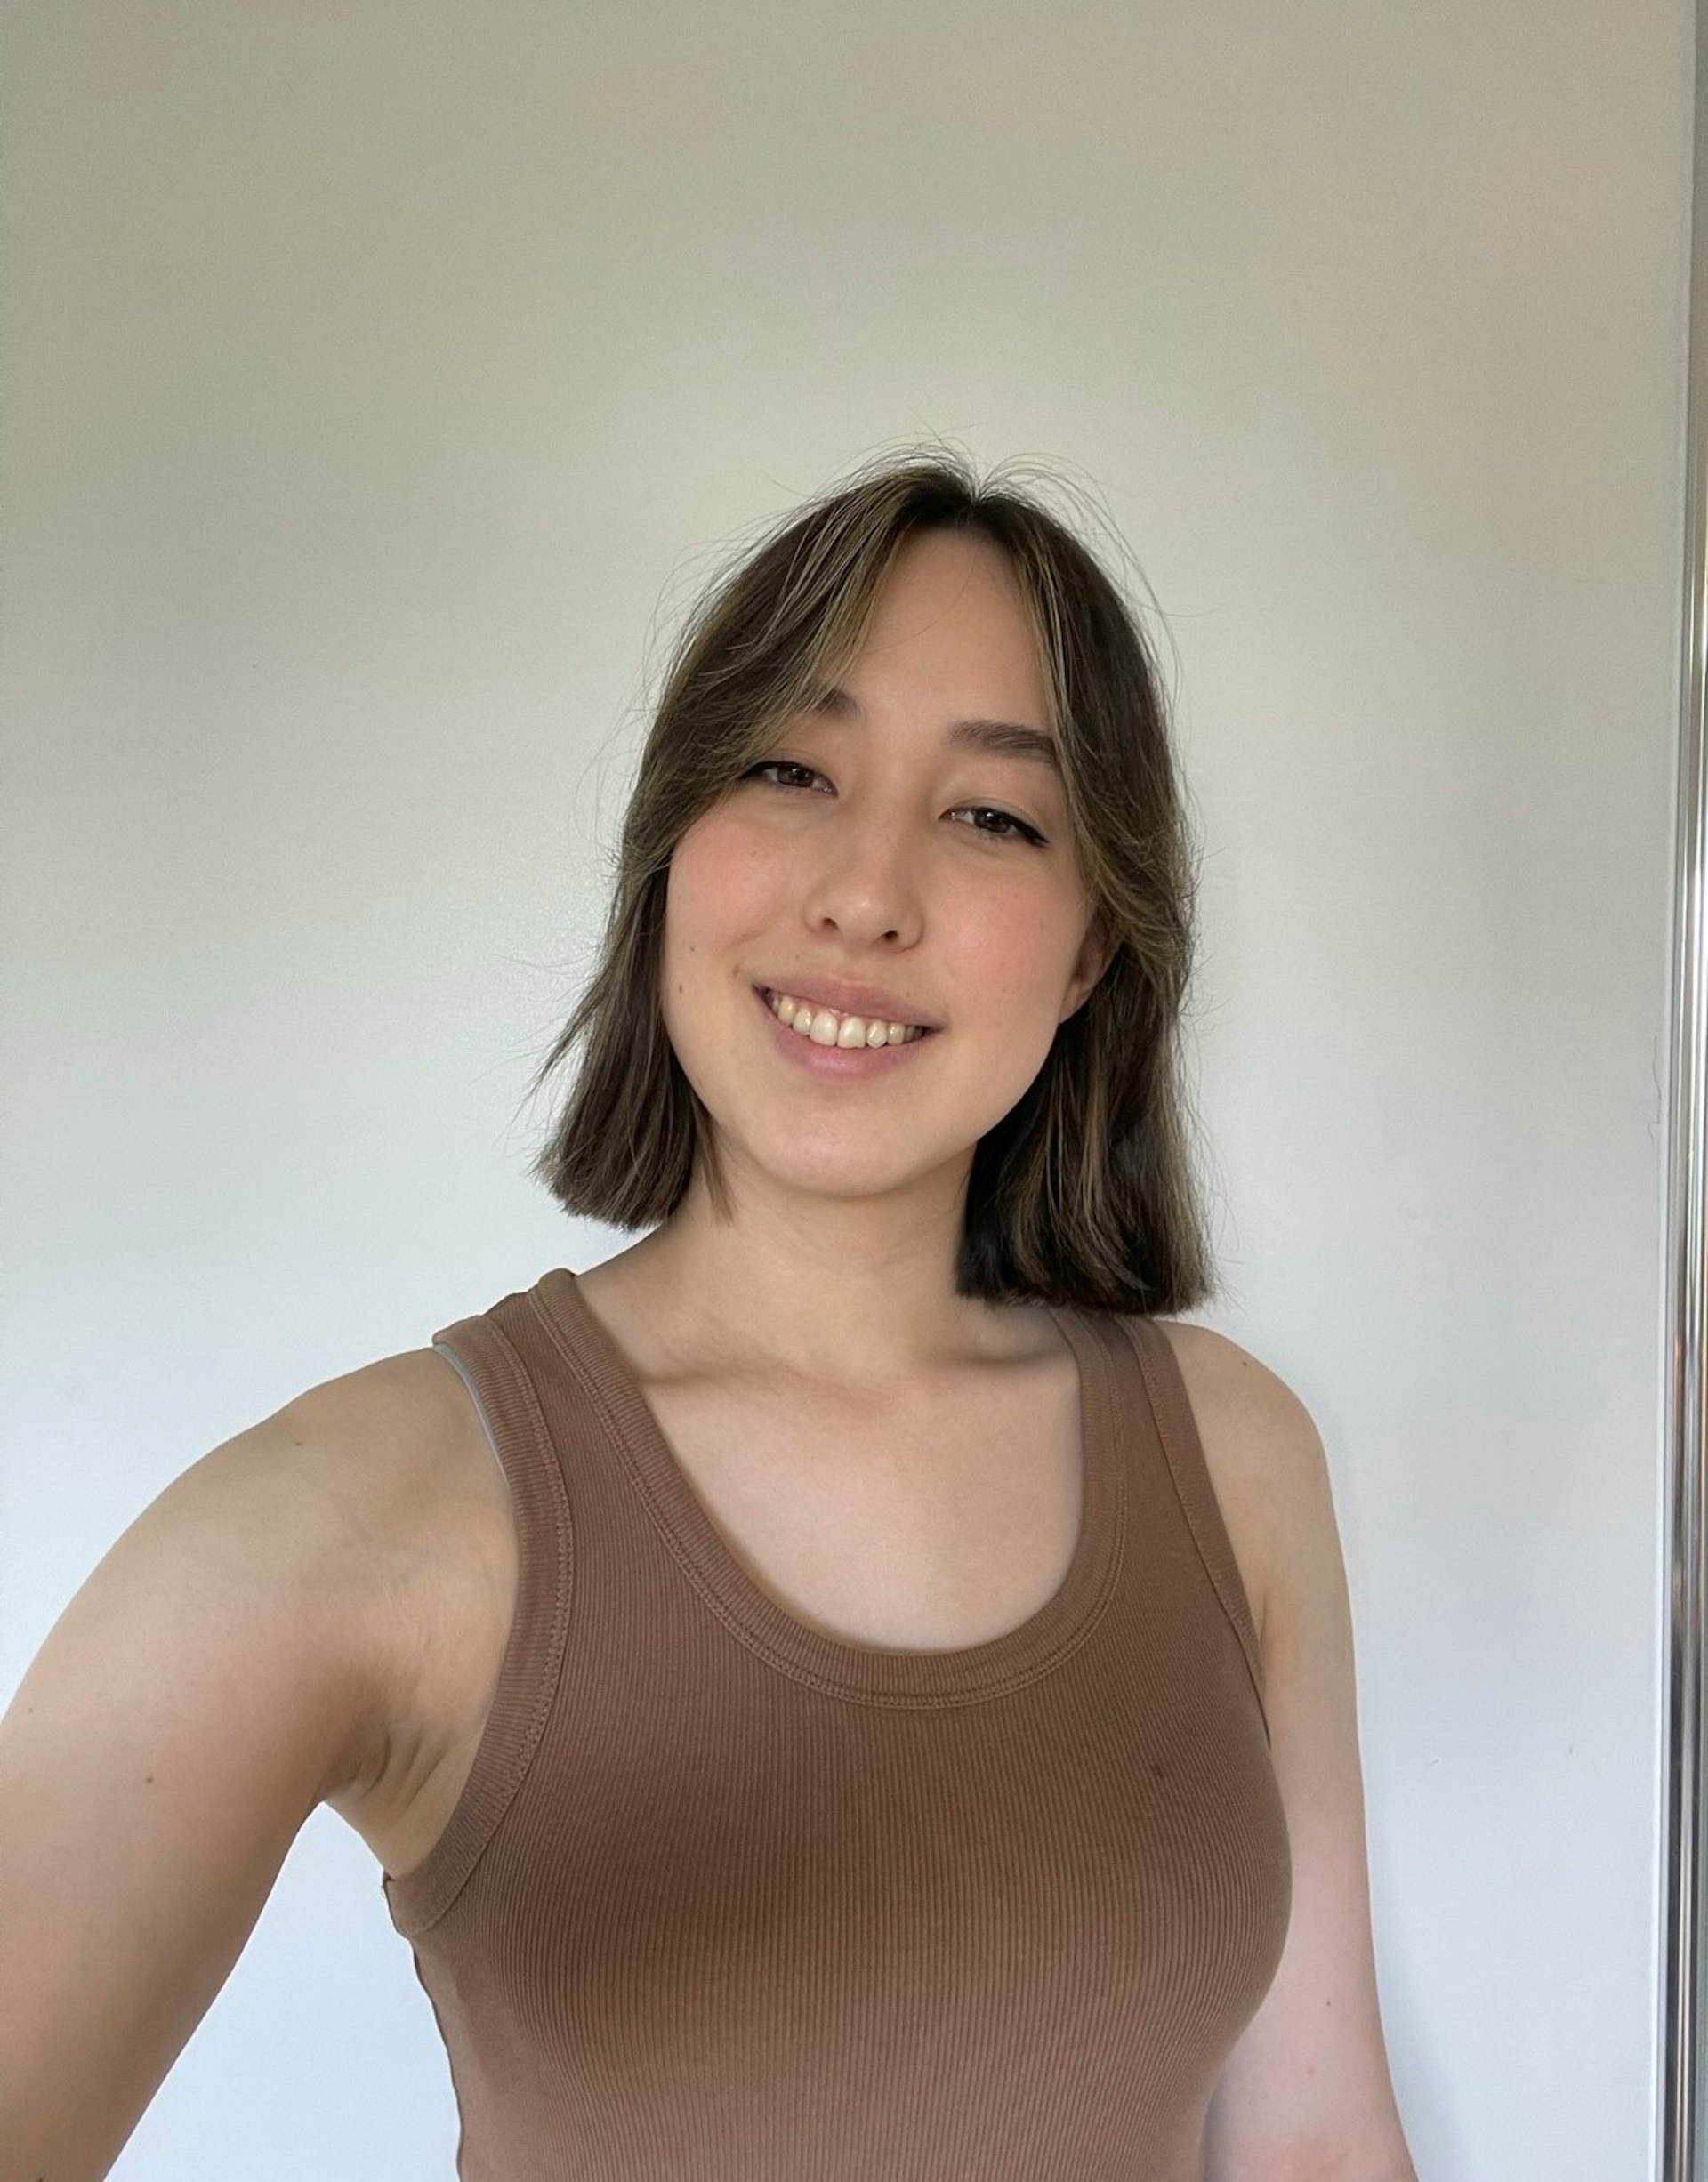 Lili stands taking a smiling selfie in front of white wall, wearing a brown singlet.